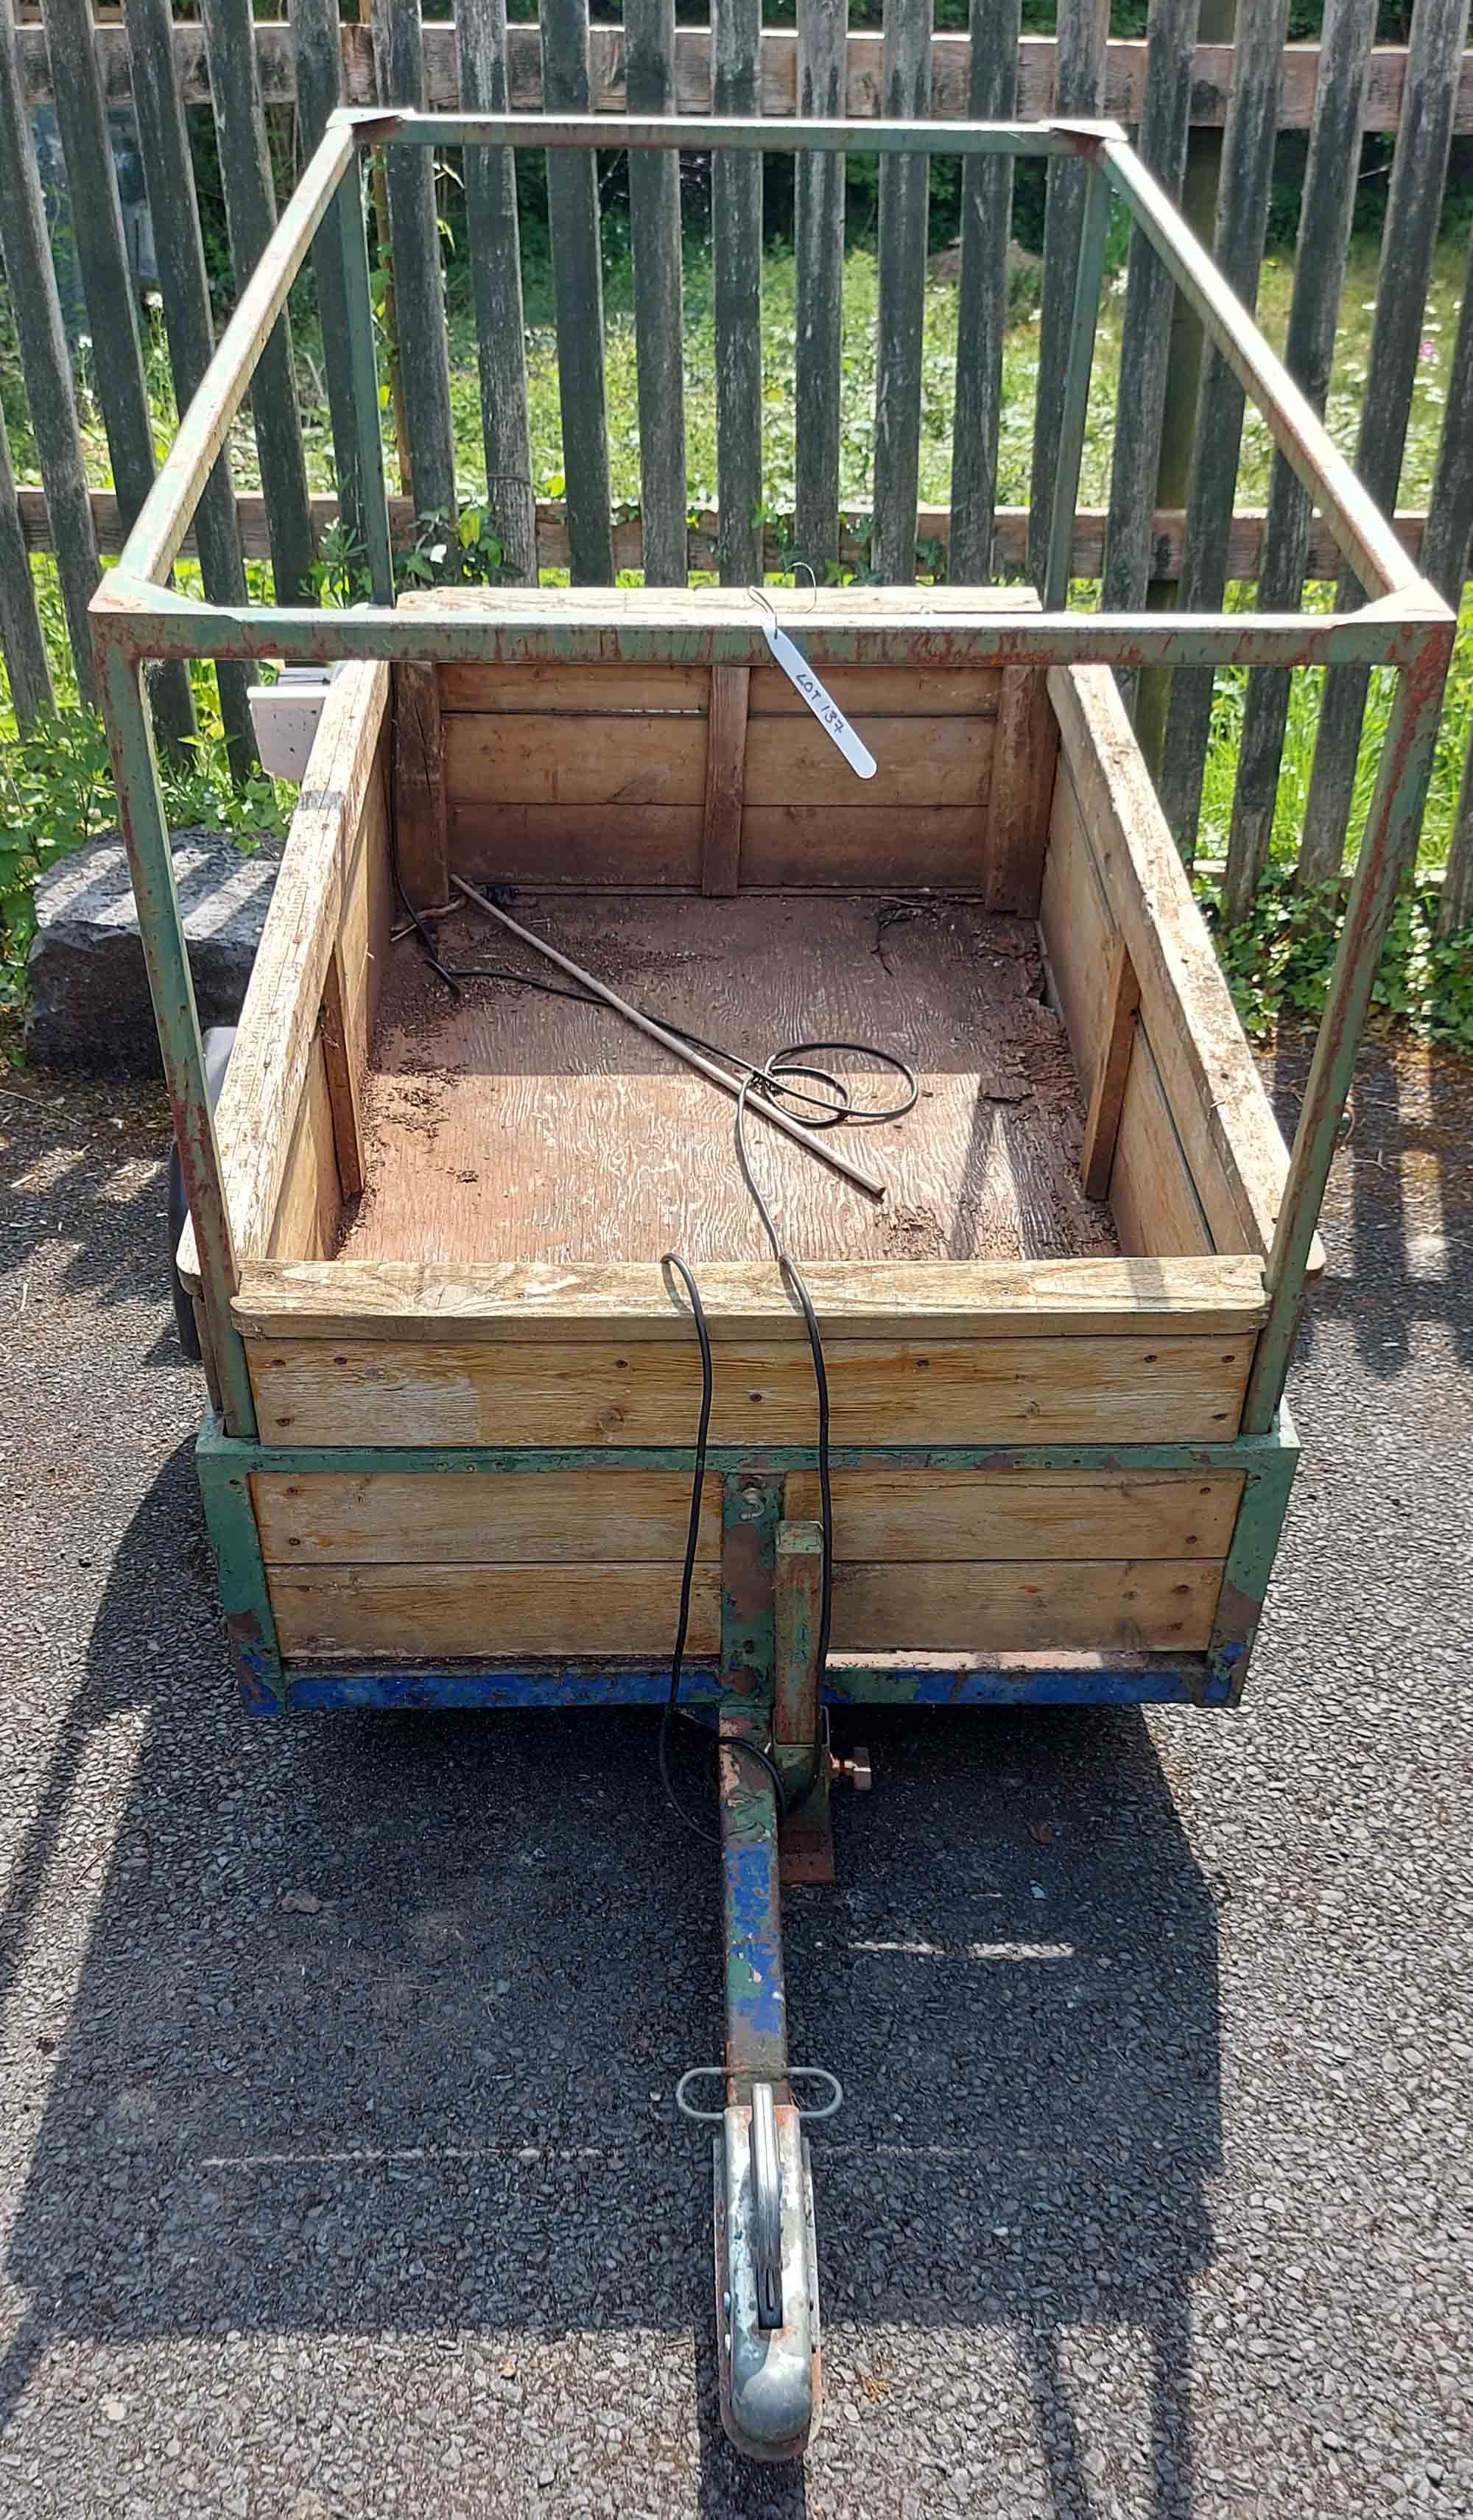 A box trailer with wooden sides